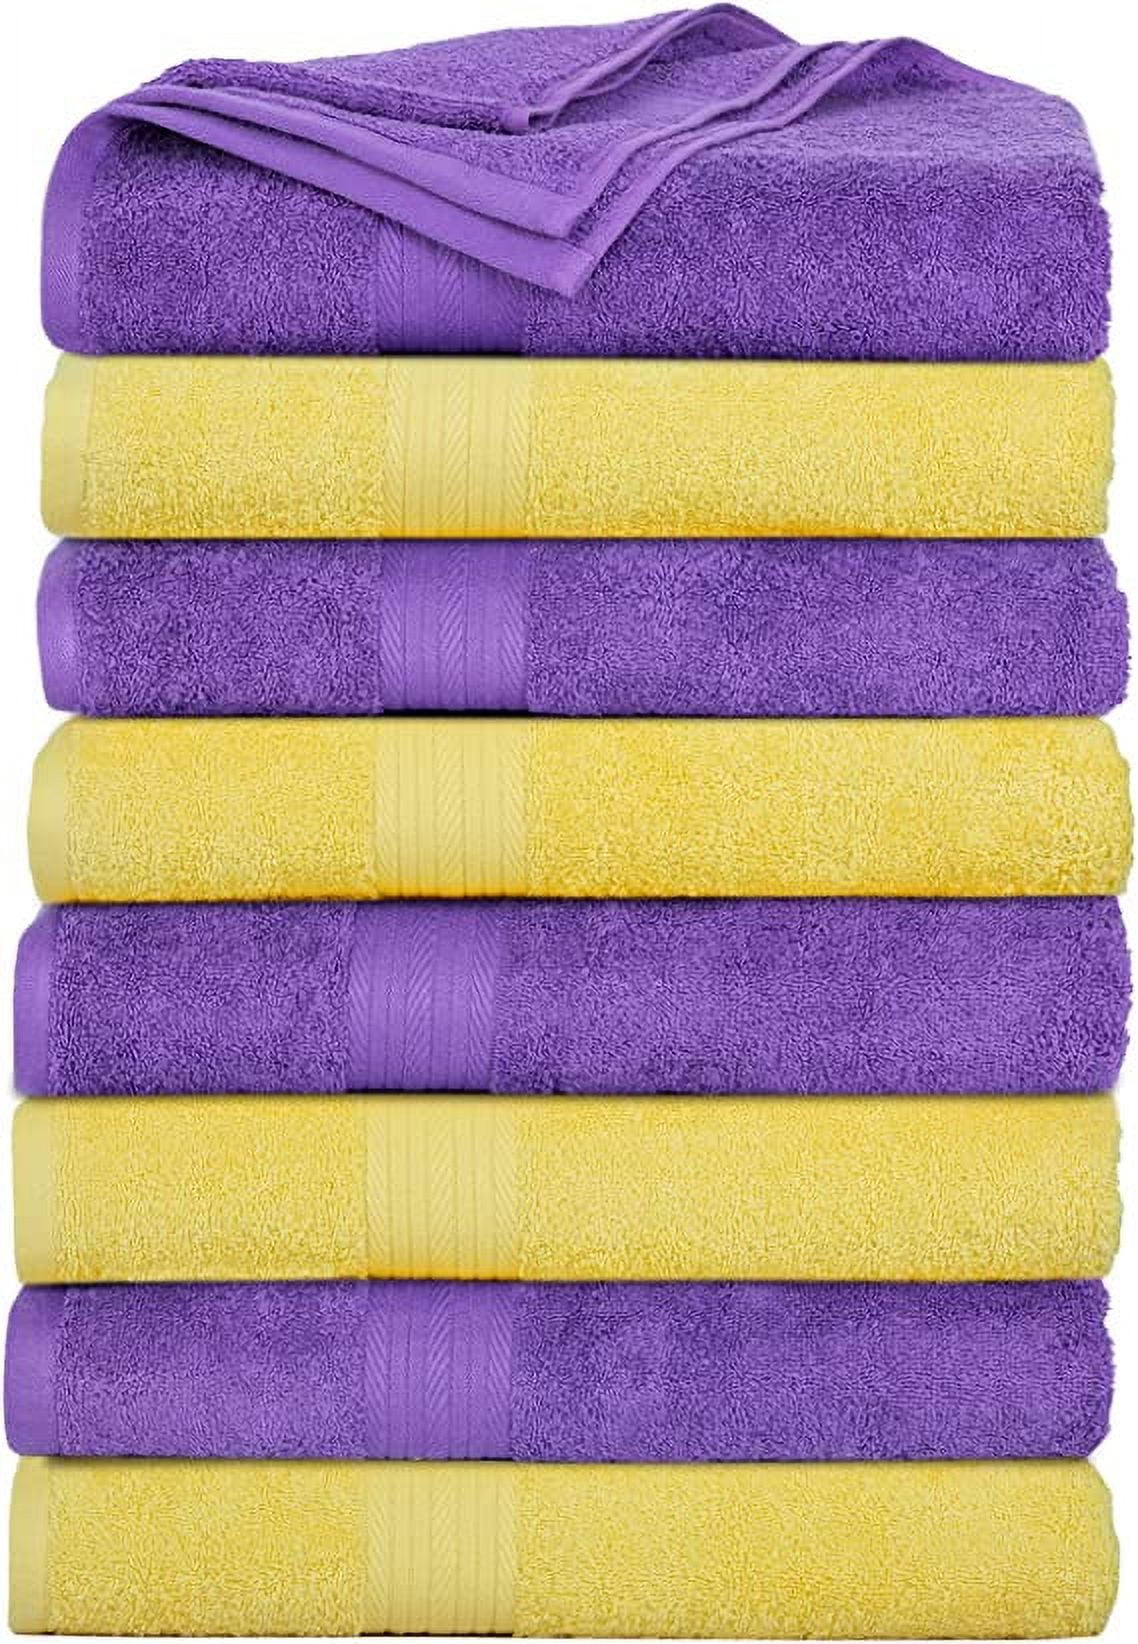 12PCS】Microflber Soft Face Towel Small Square 30cm*30cm Super absorbent  hand towel COD